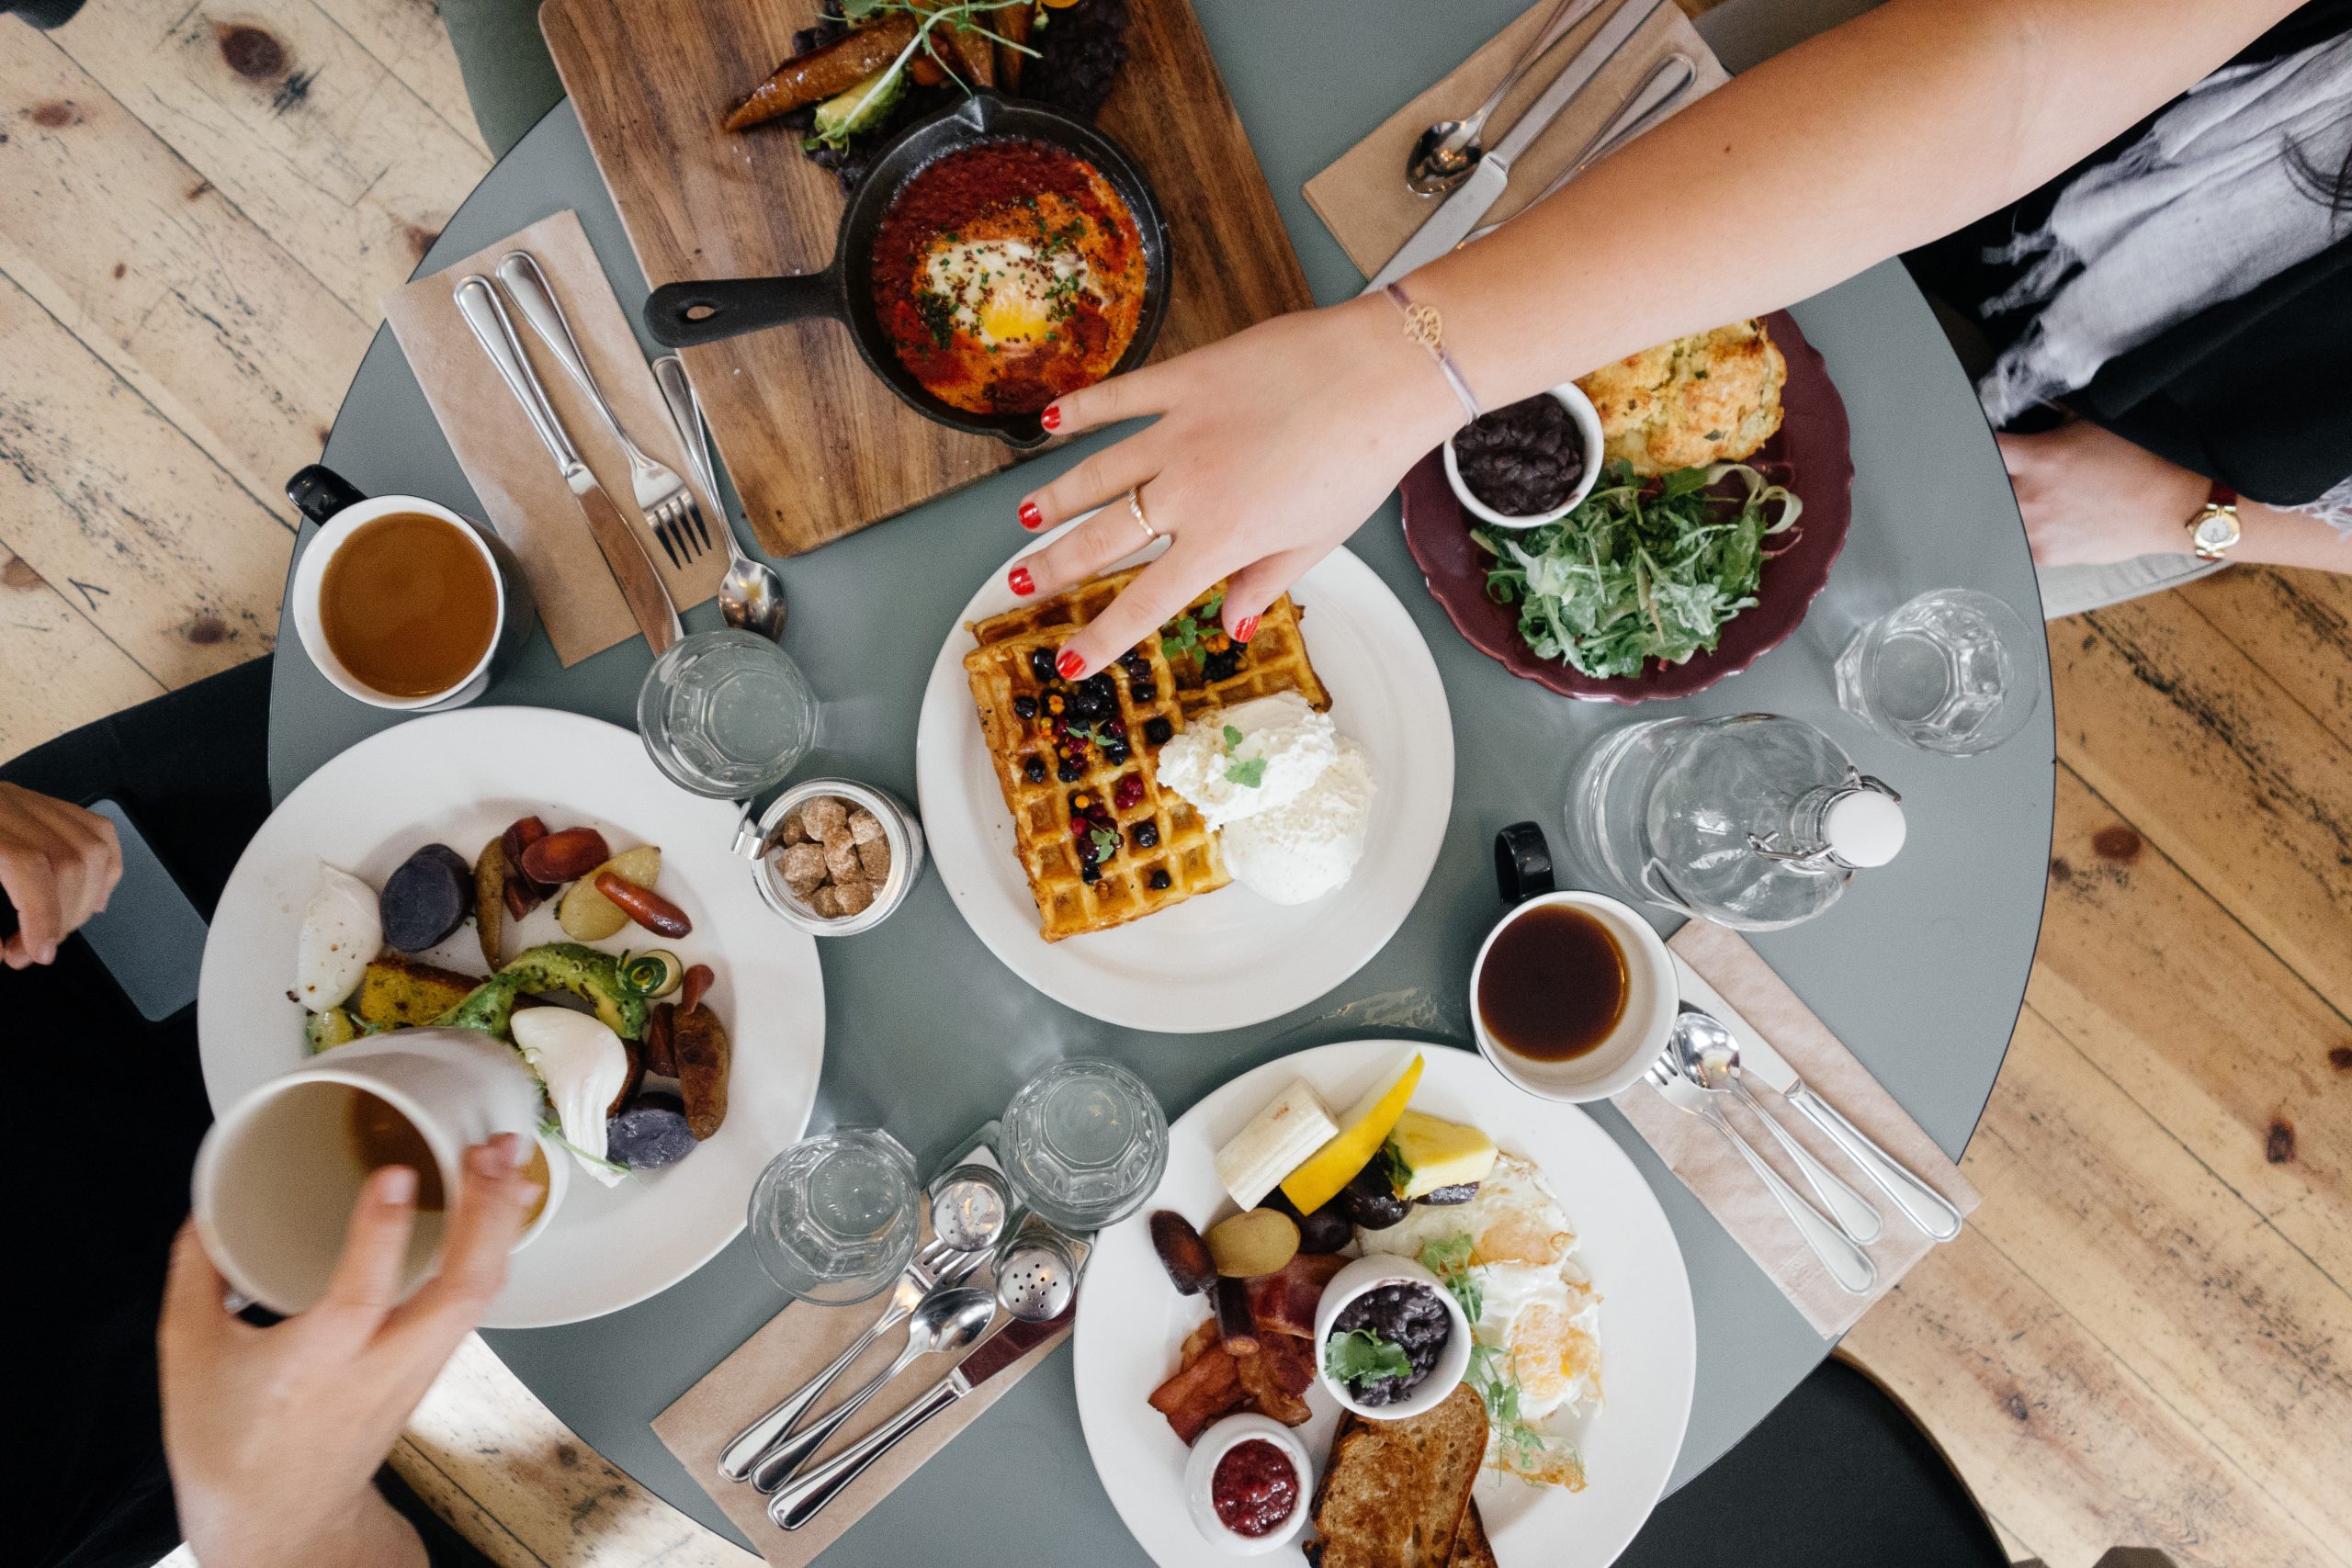 A picture of people's hands reaching over a breakfast table featuring coffee, water, waffles with fruit and whipped cream, greens, toast, eggs, bacon, ketchup, shakshuka, silverware, and more